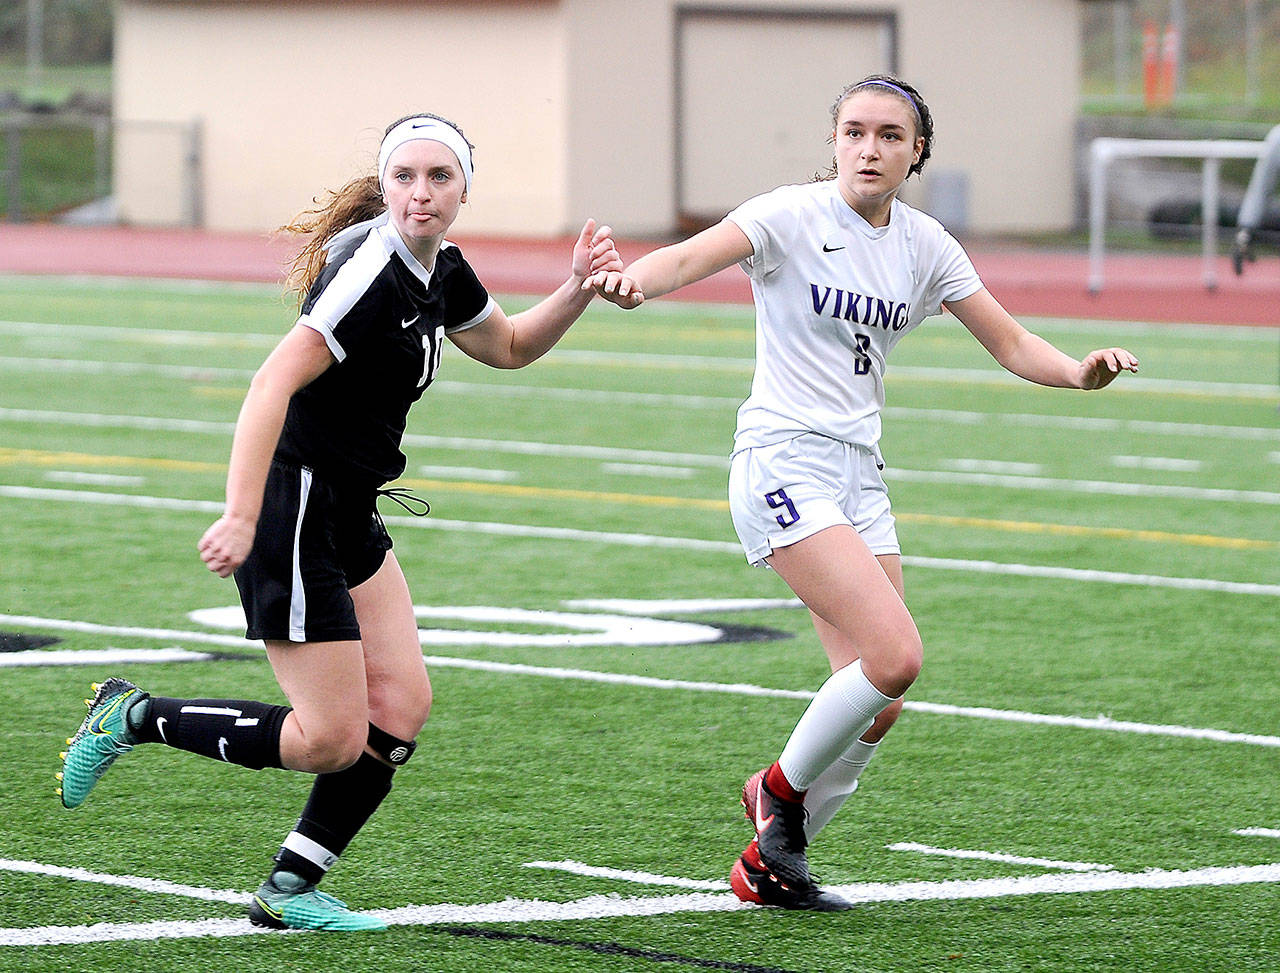 Sequim’s Gabby Happe, left, battles for position with North Kitsap’s Charlotte Bond in the West Central District III championship Sarturday in Silverdale. Sequim won 1-0 to take the championship. (Michael Dashiell/North Olympic News Group)